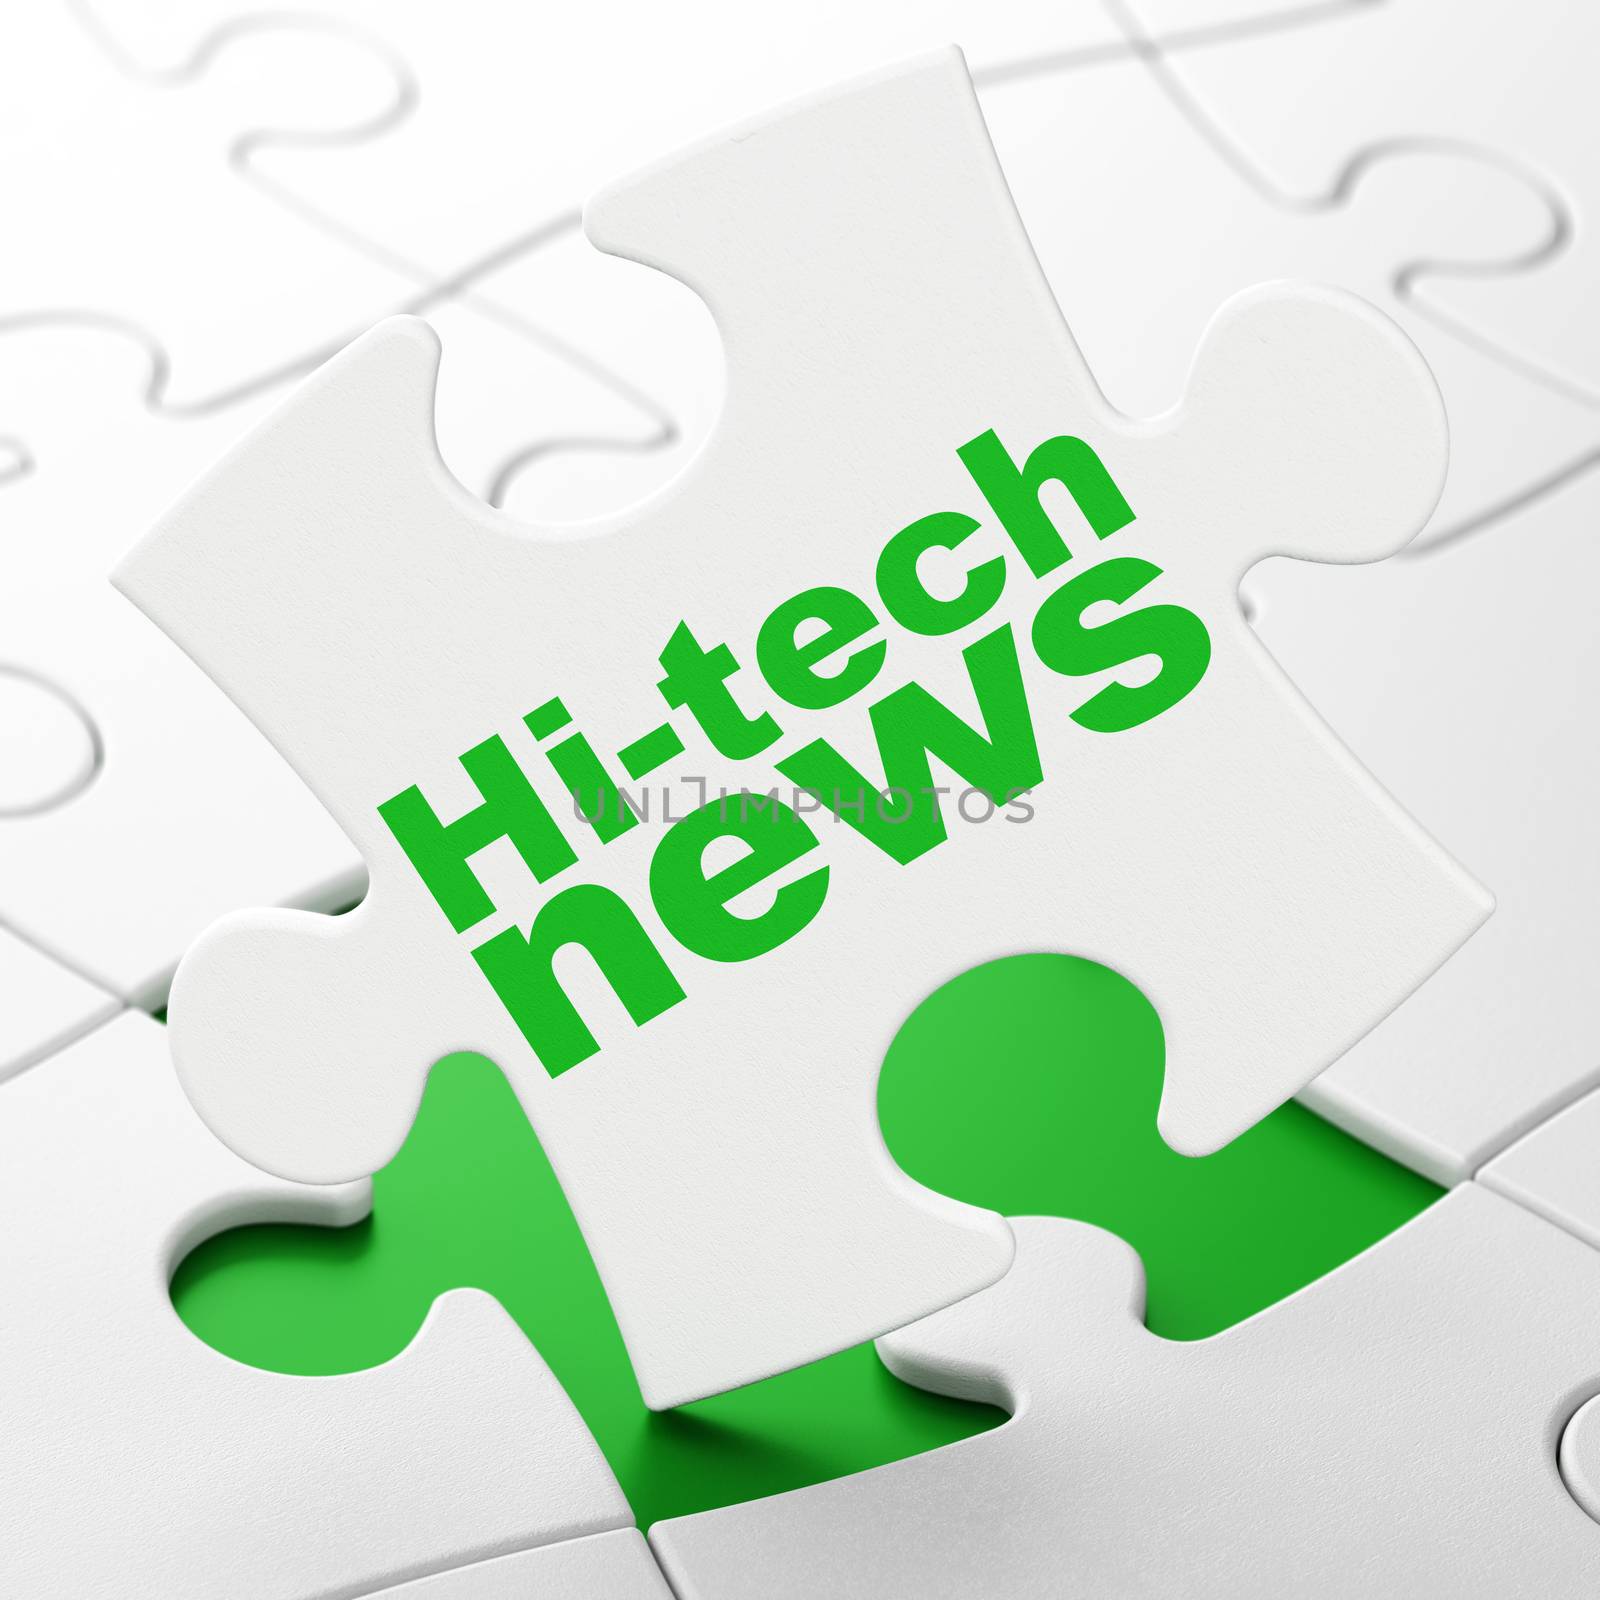 News concept: Hi-tech News on White puzzle pieces background, 3D rendering